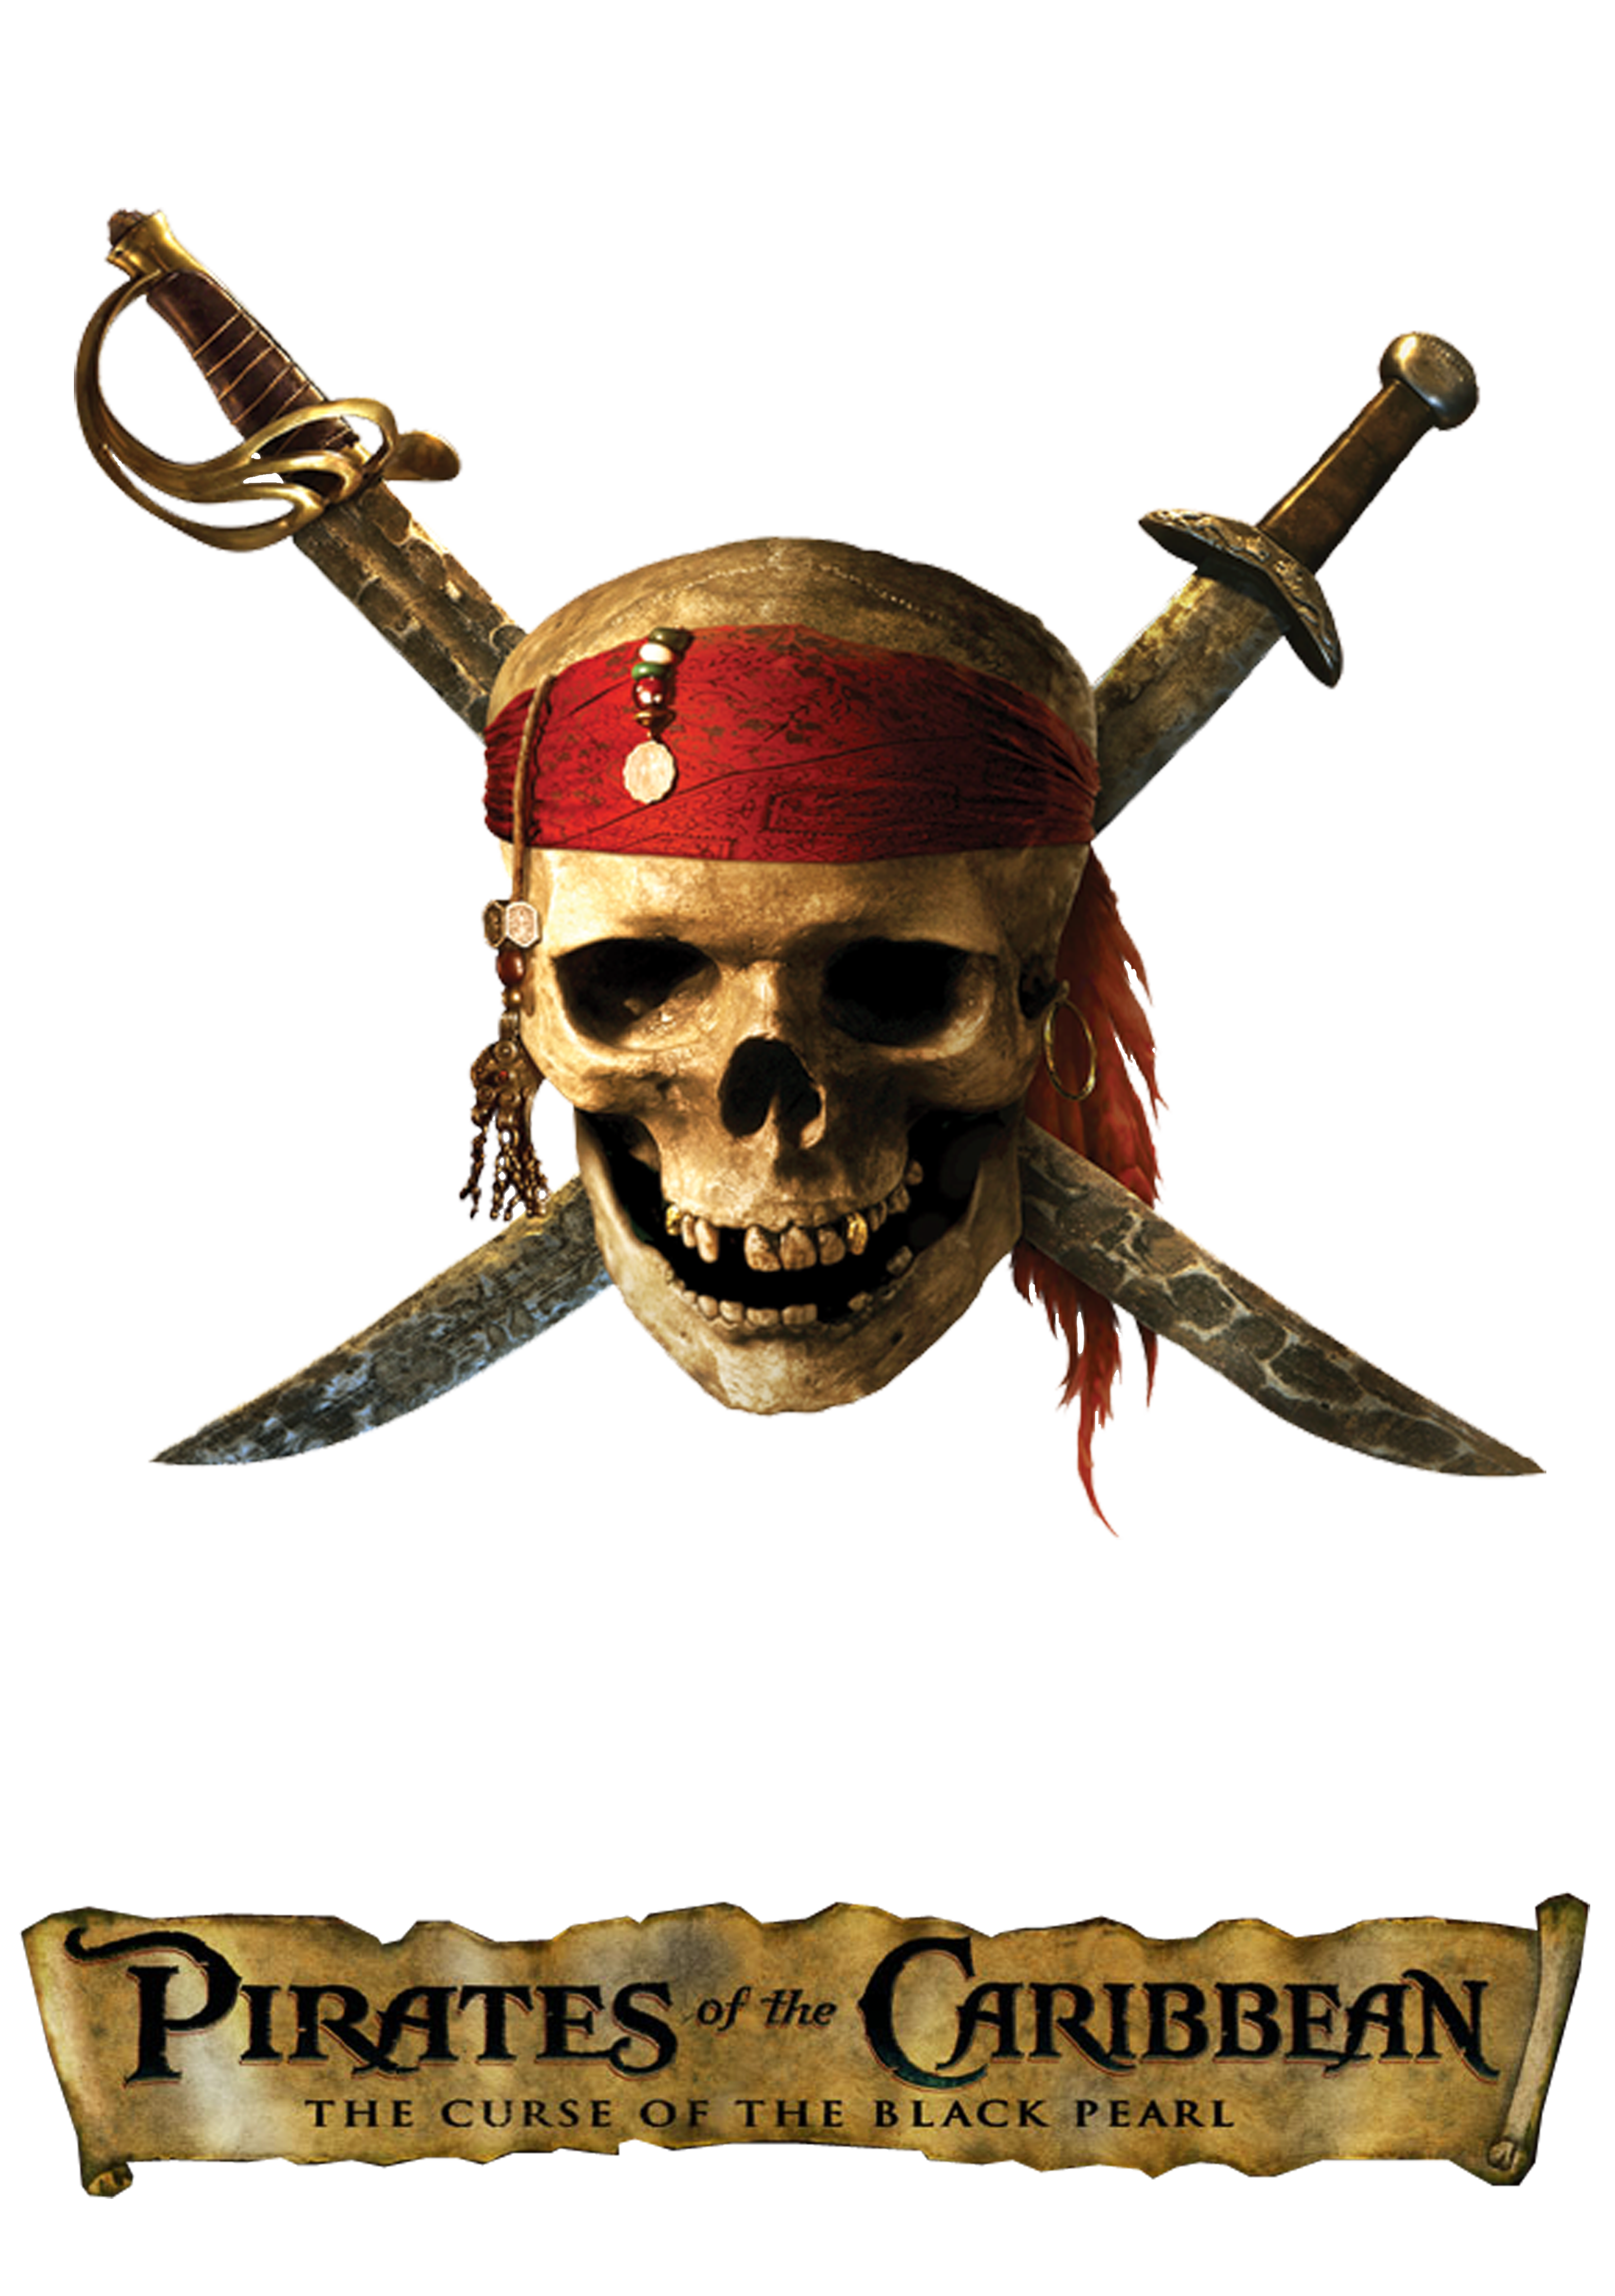 Pirates of the caribbean 1 skull by EDENTRON on DeviantArt